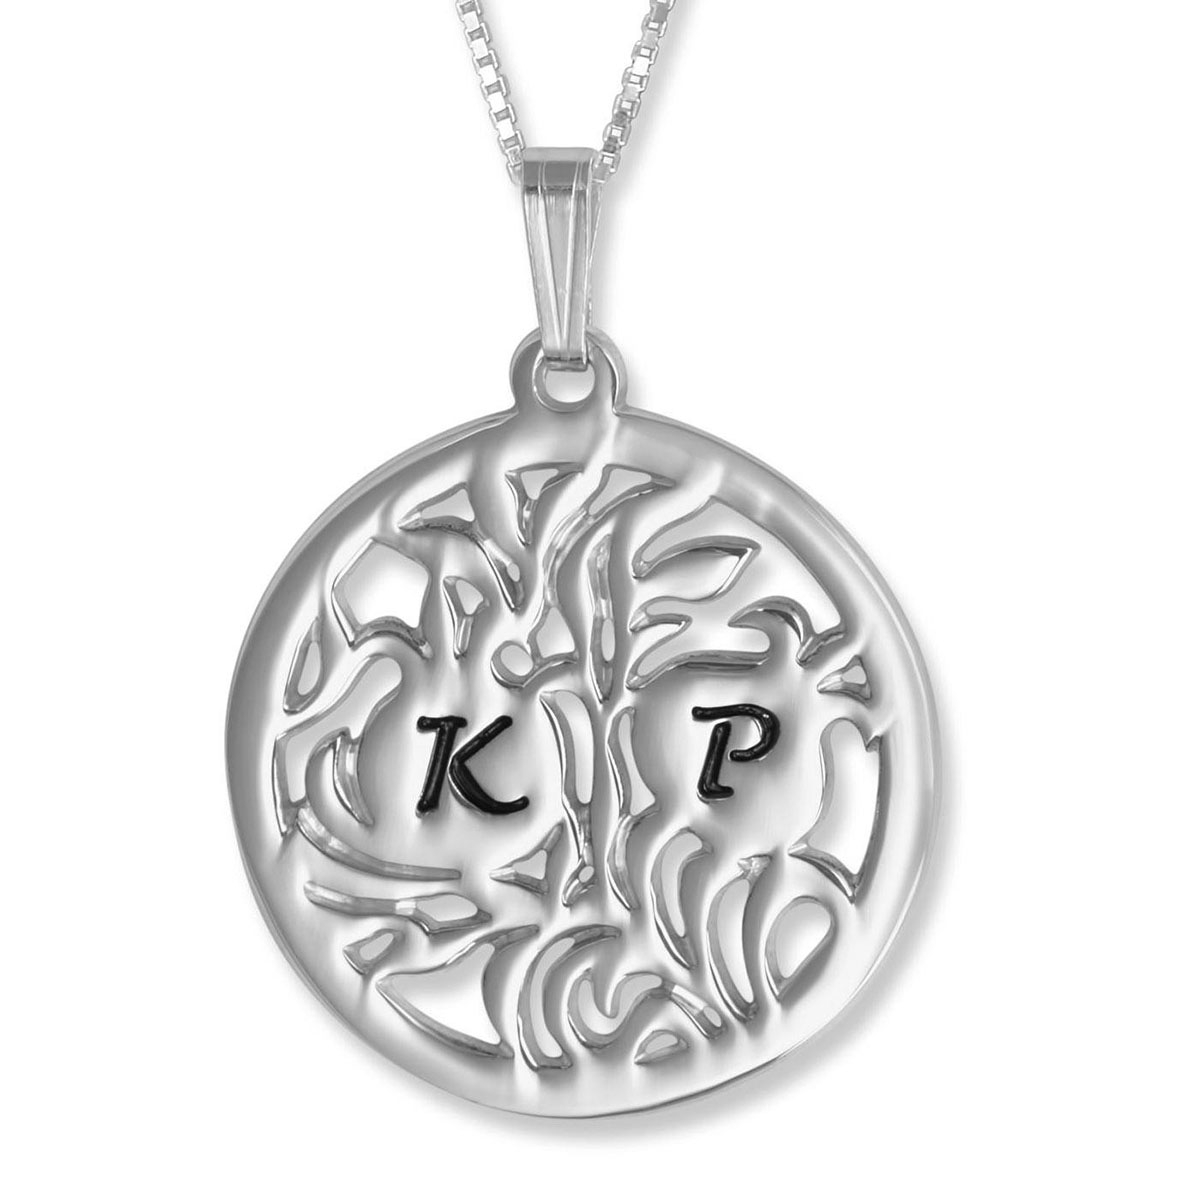 Silver Pomegranate Disc Necklace with Initials (Hebrew / English) - 1